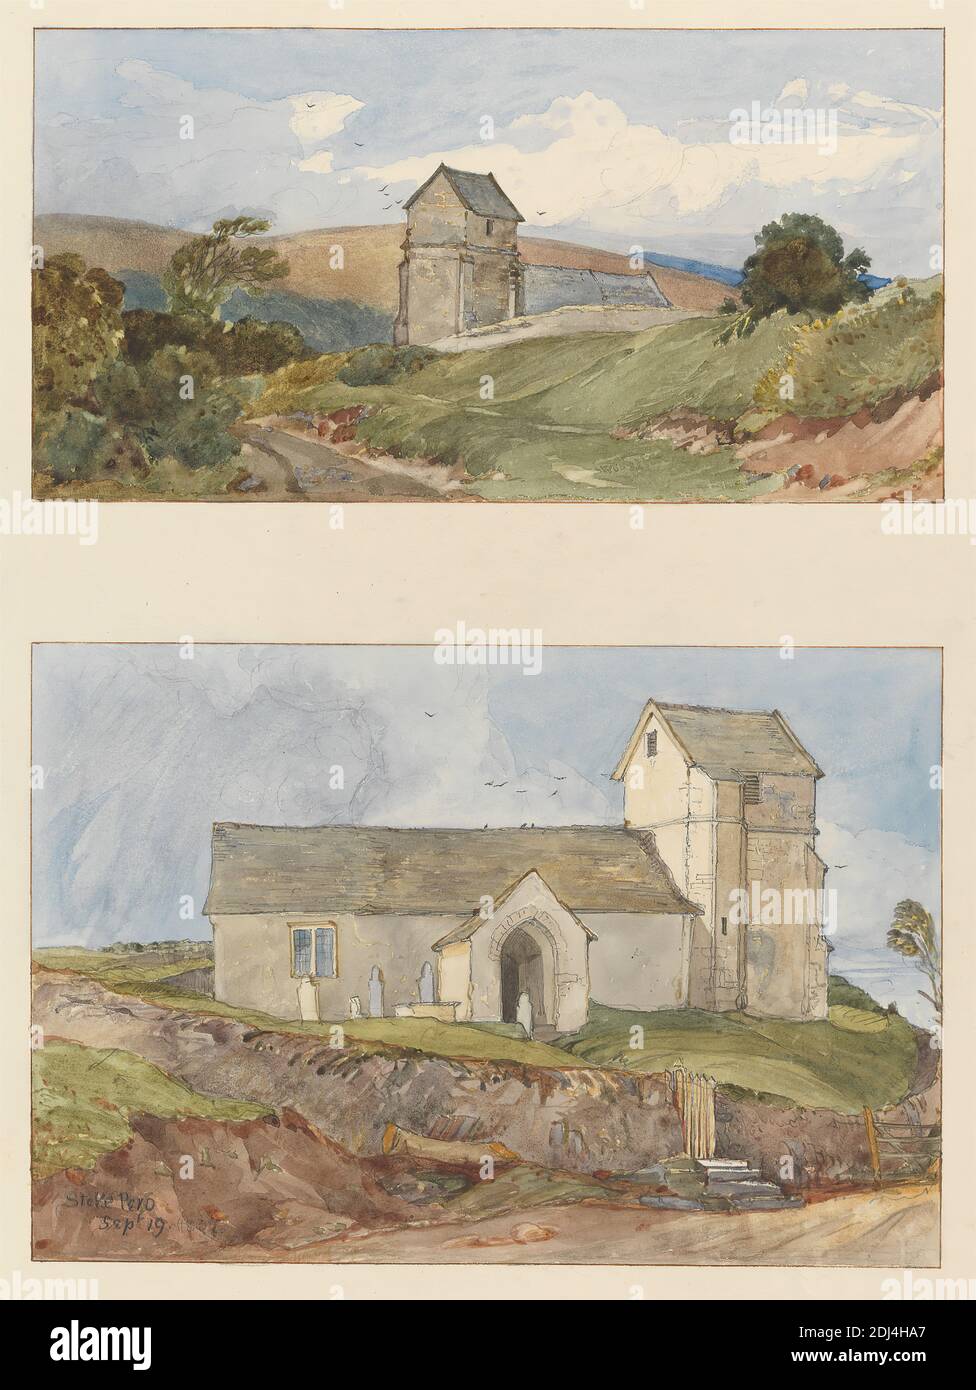 One from A Volume of Drawings and Prints, Rev. James Bulwer, 1794–1879, British, 1837, Pen and brown ink, watercolor, graphite, Sheet: 17 1/4 × 13 5/8 inches (43.8 × 34.6 cm) and Image: 11 3/8 × 8 3/8 inches (28.9 × 21.3 cm), architectural subject Stock Photo